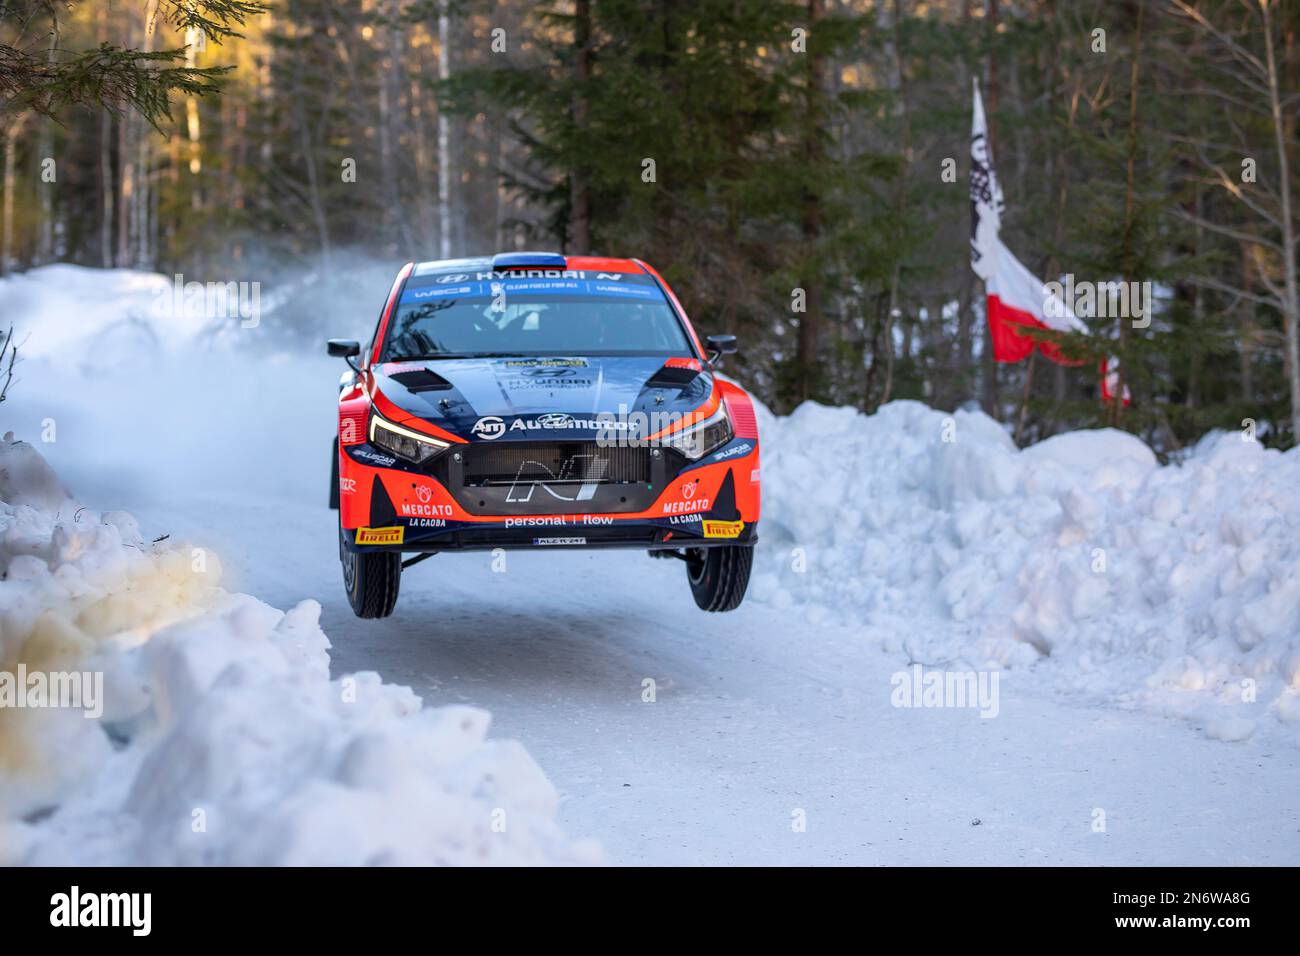 UMEÅ 20230210 Fabrizio Zaldivar, Paraguay and Marcelo Der Ohannesian, Italy, Hyundai i20 N, WRC2, during Friday's races in the Swedish Rally, World Rally Championship round 2.  Photo Micke Fransson / TT code 61460 Stock Photo